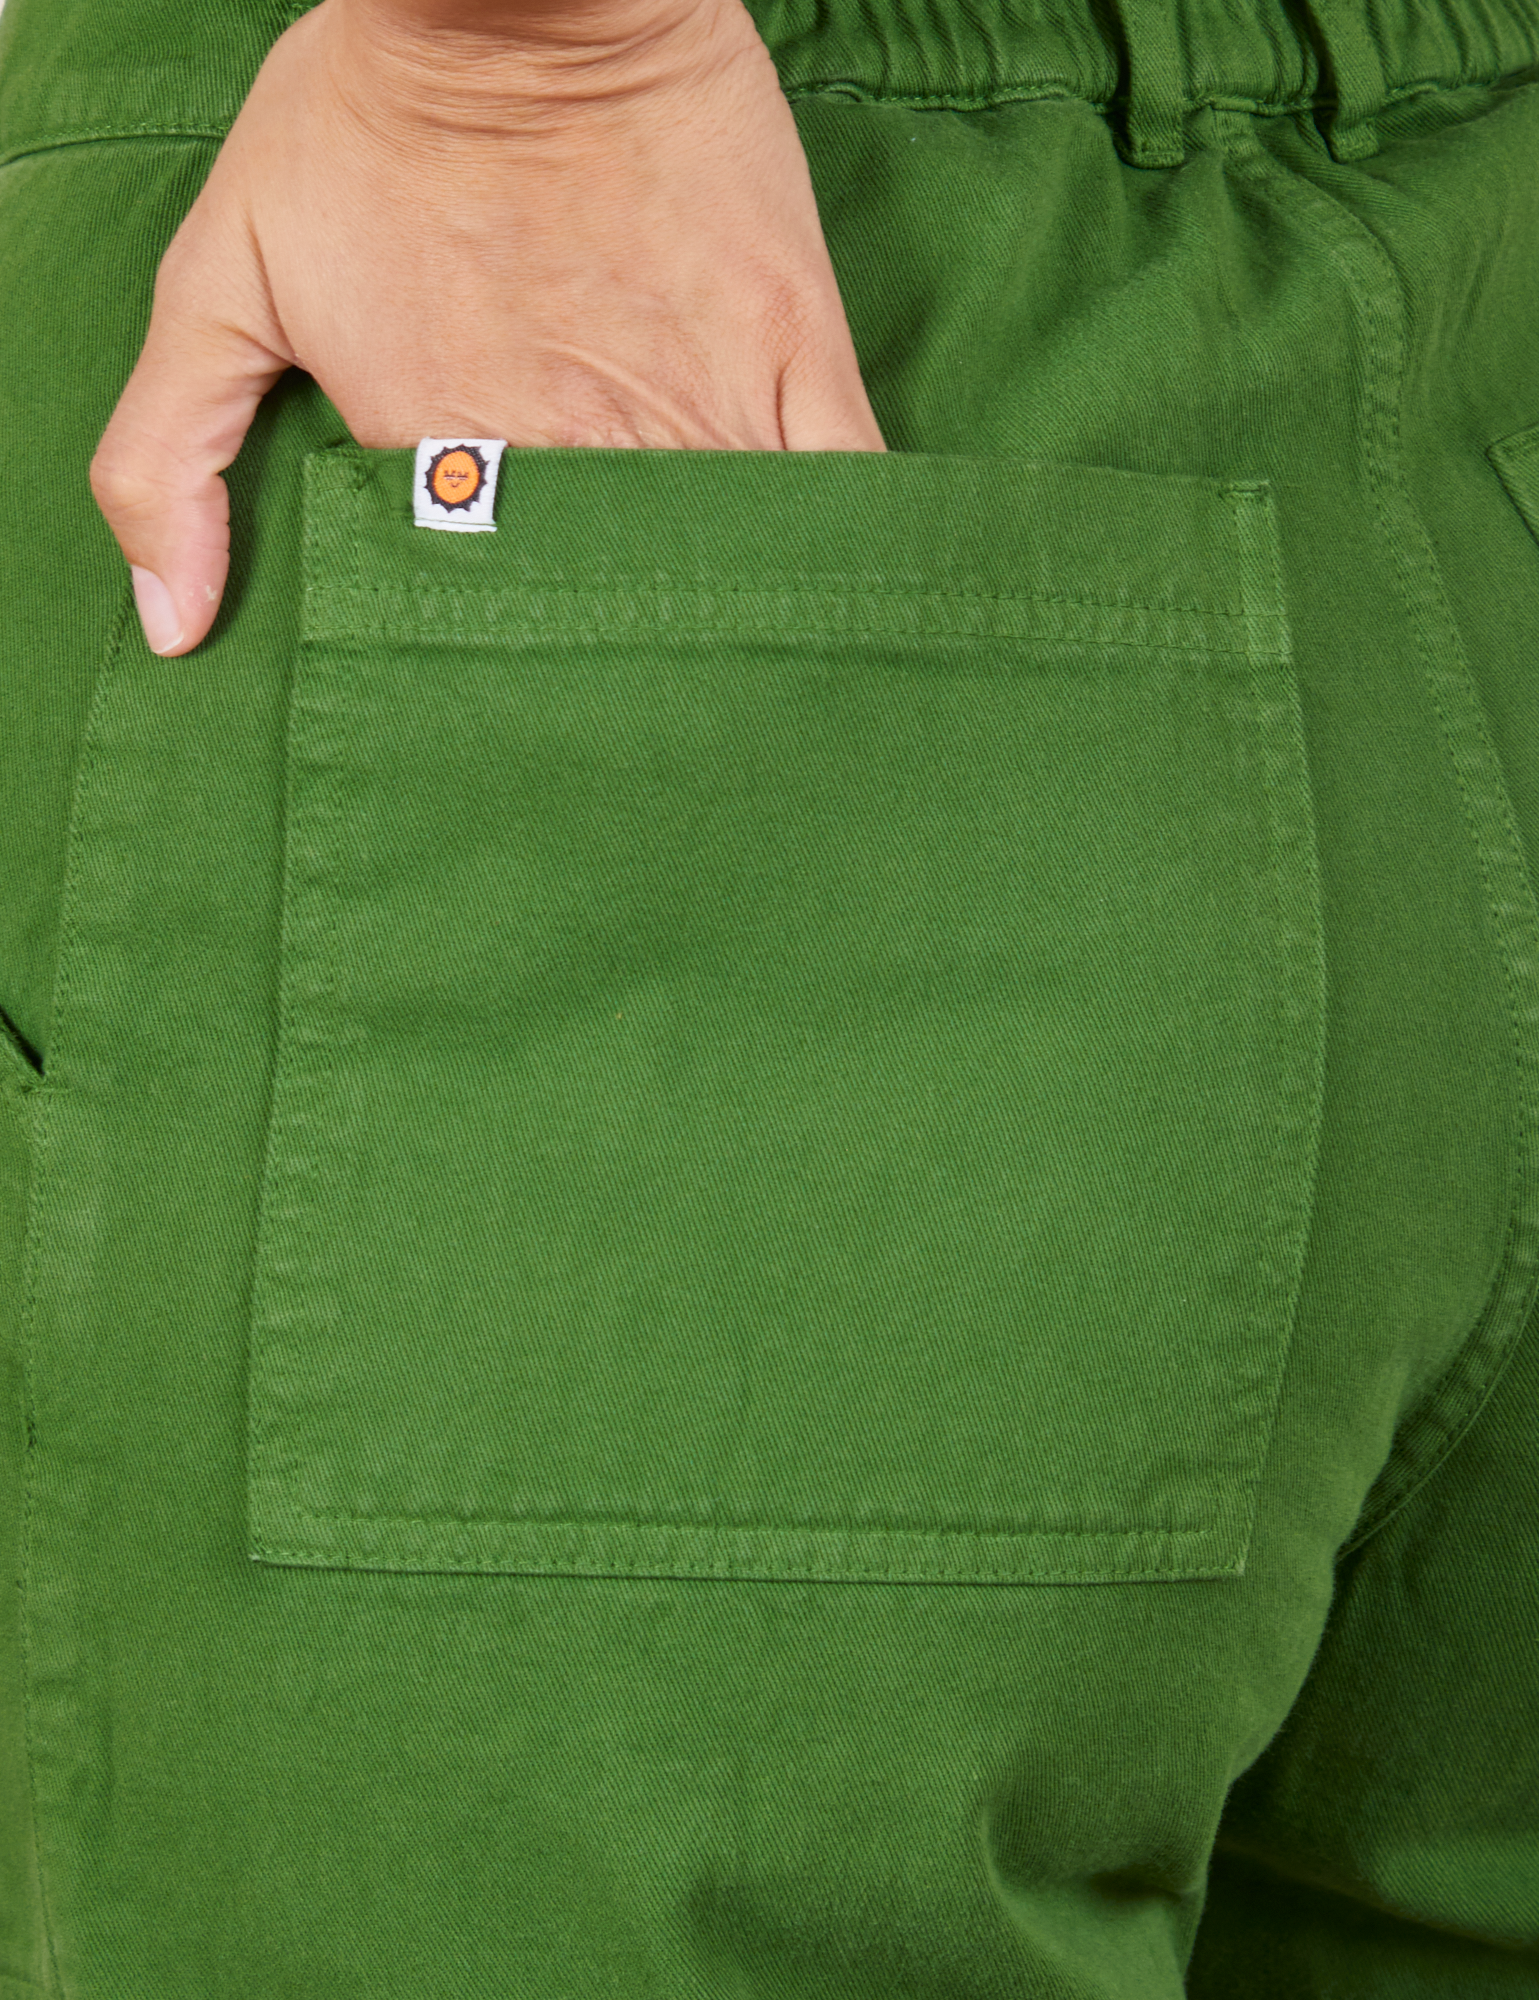 Back pocket close up of Short Sleeve Jumpsuit in Lawn Green. Tiara has her hand in the pocket.